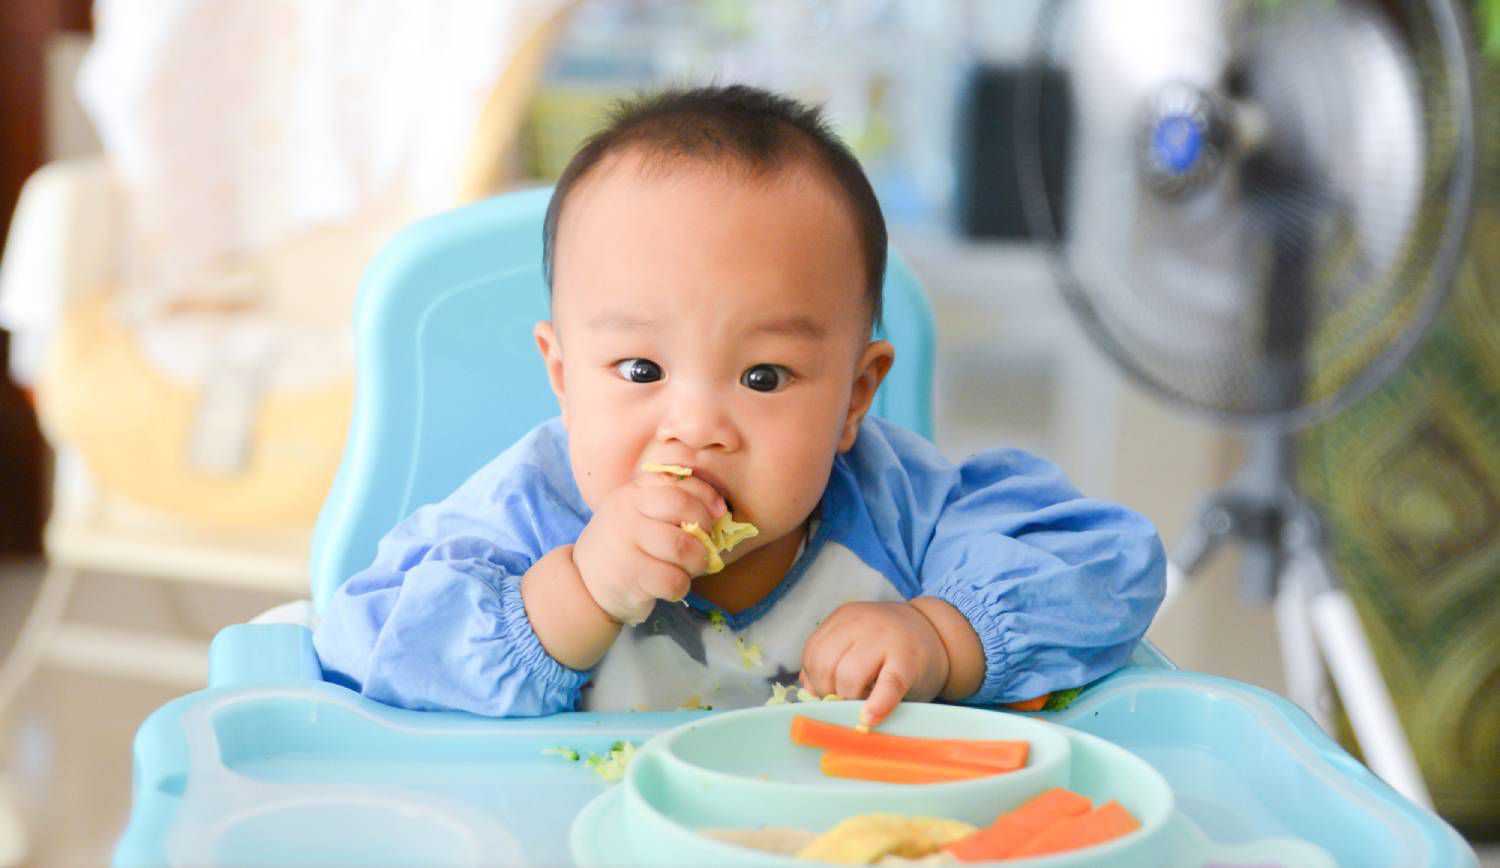 Could you imagine what it would be like to be fed only new things all the time? It'd be exhausting. That's what is like for a baby, so be patient when introducing them to solid food. 